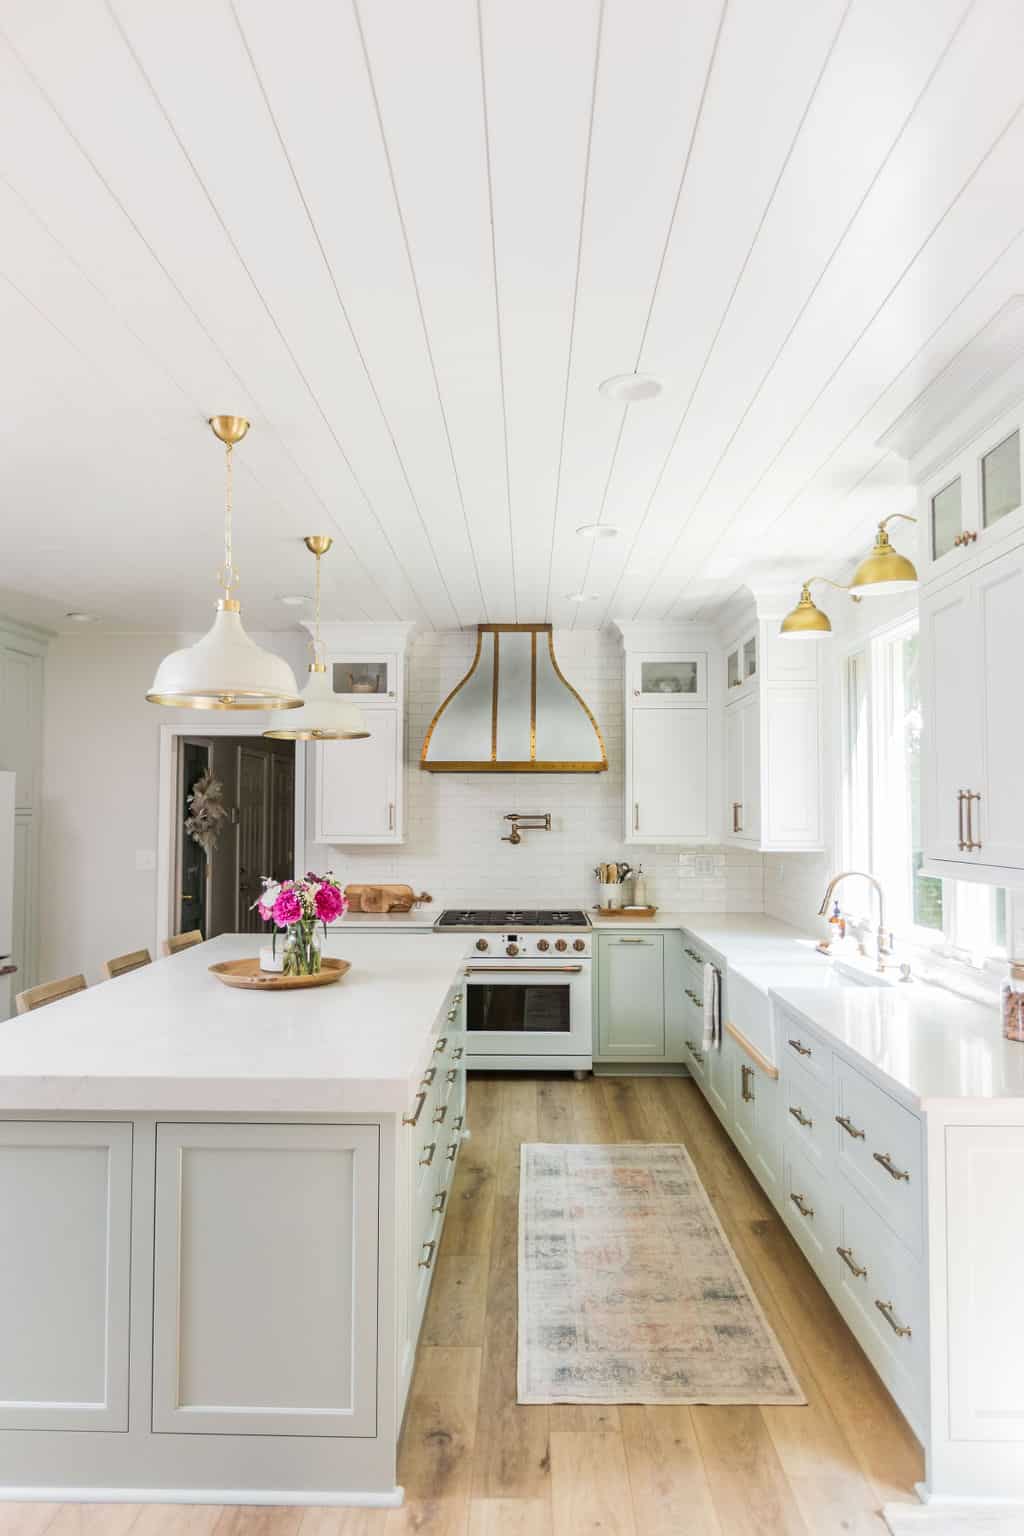 Nicholas Design Build | Bright and airy kitchen with white cabinetry, a central island, and gold pendant lighting.